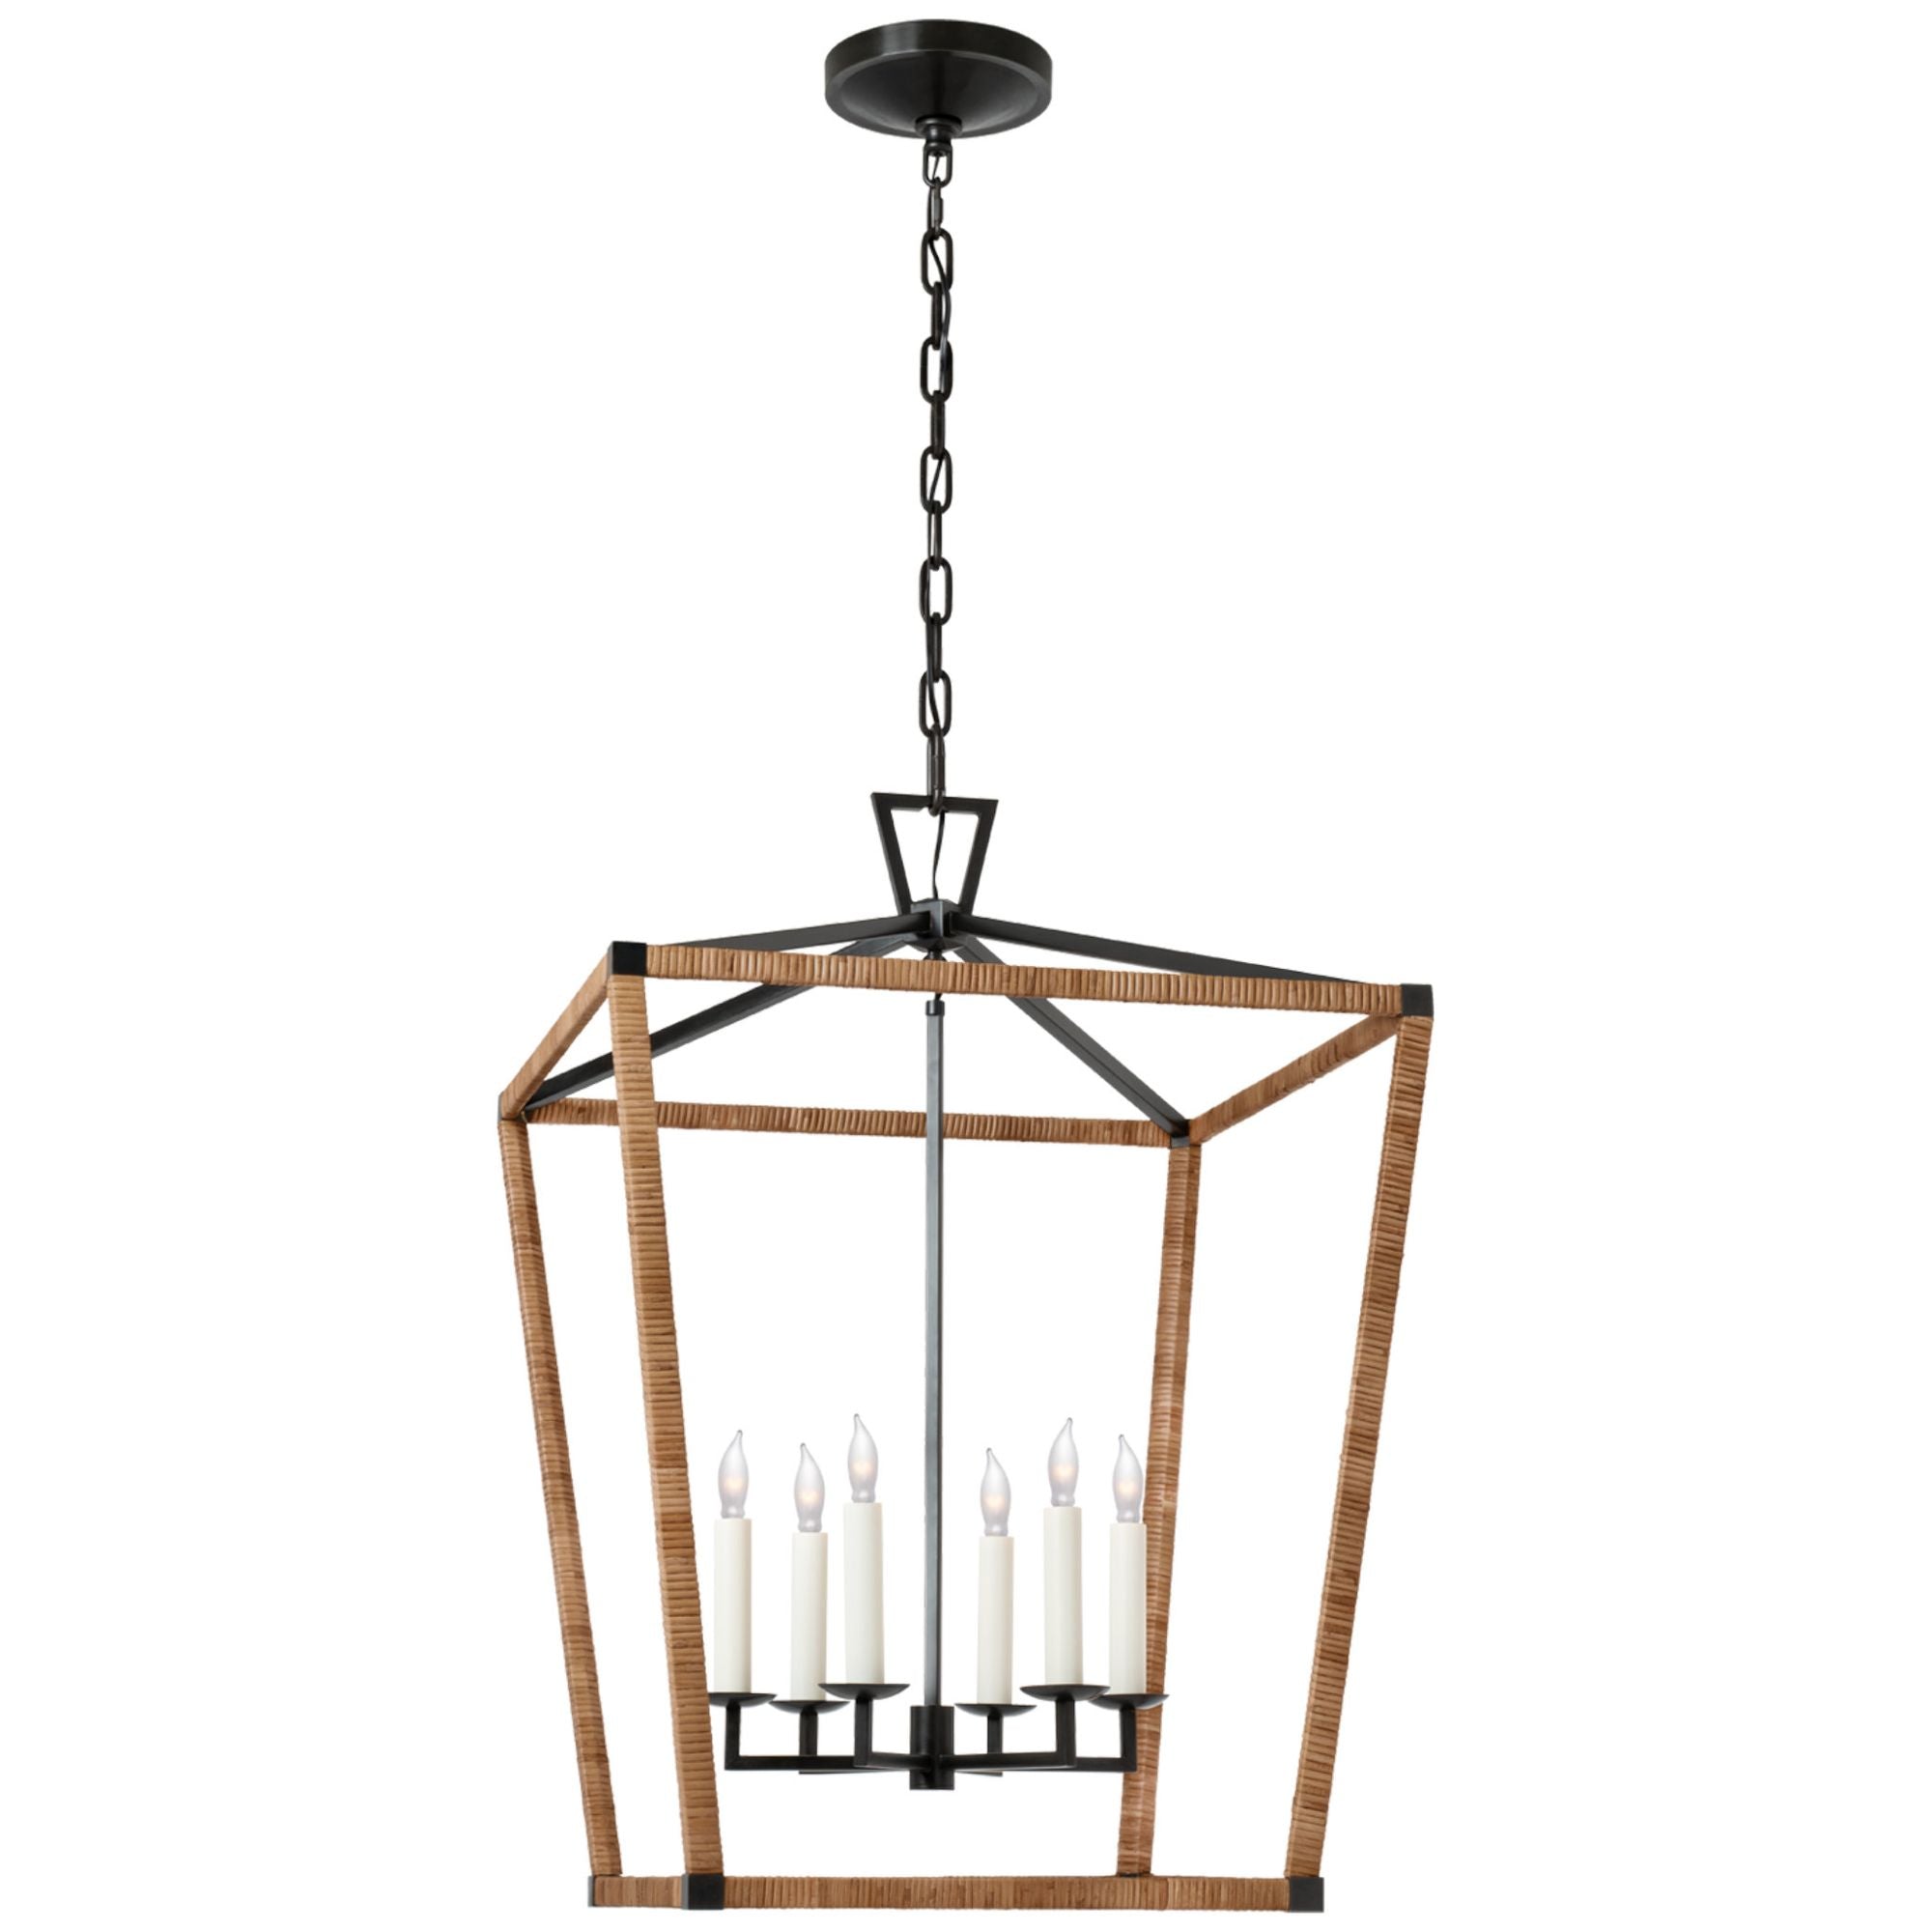 Chapman & Myers Darlana Large Wrapped Lantern in Aged Iron and Natural Rattan